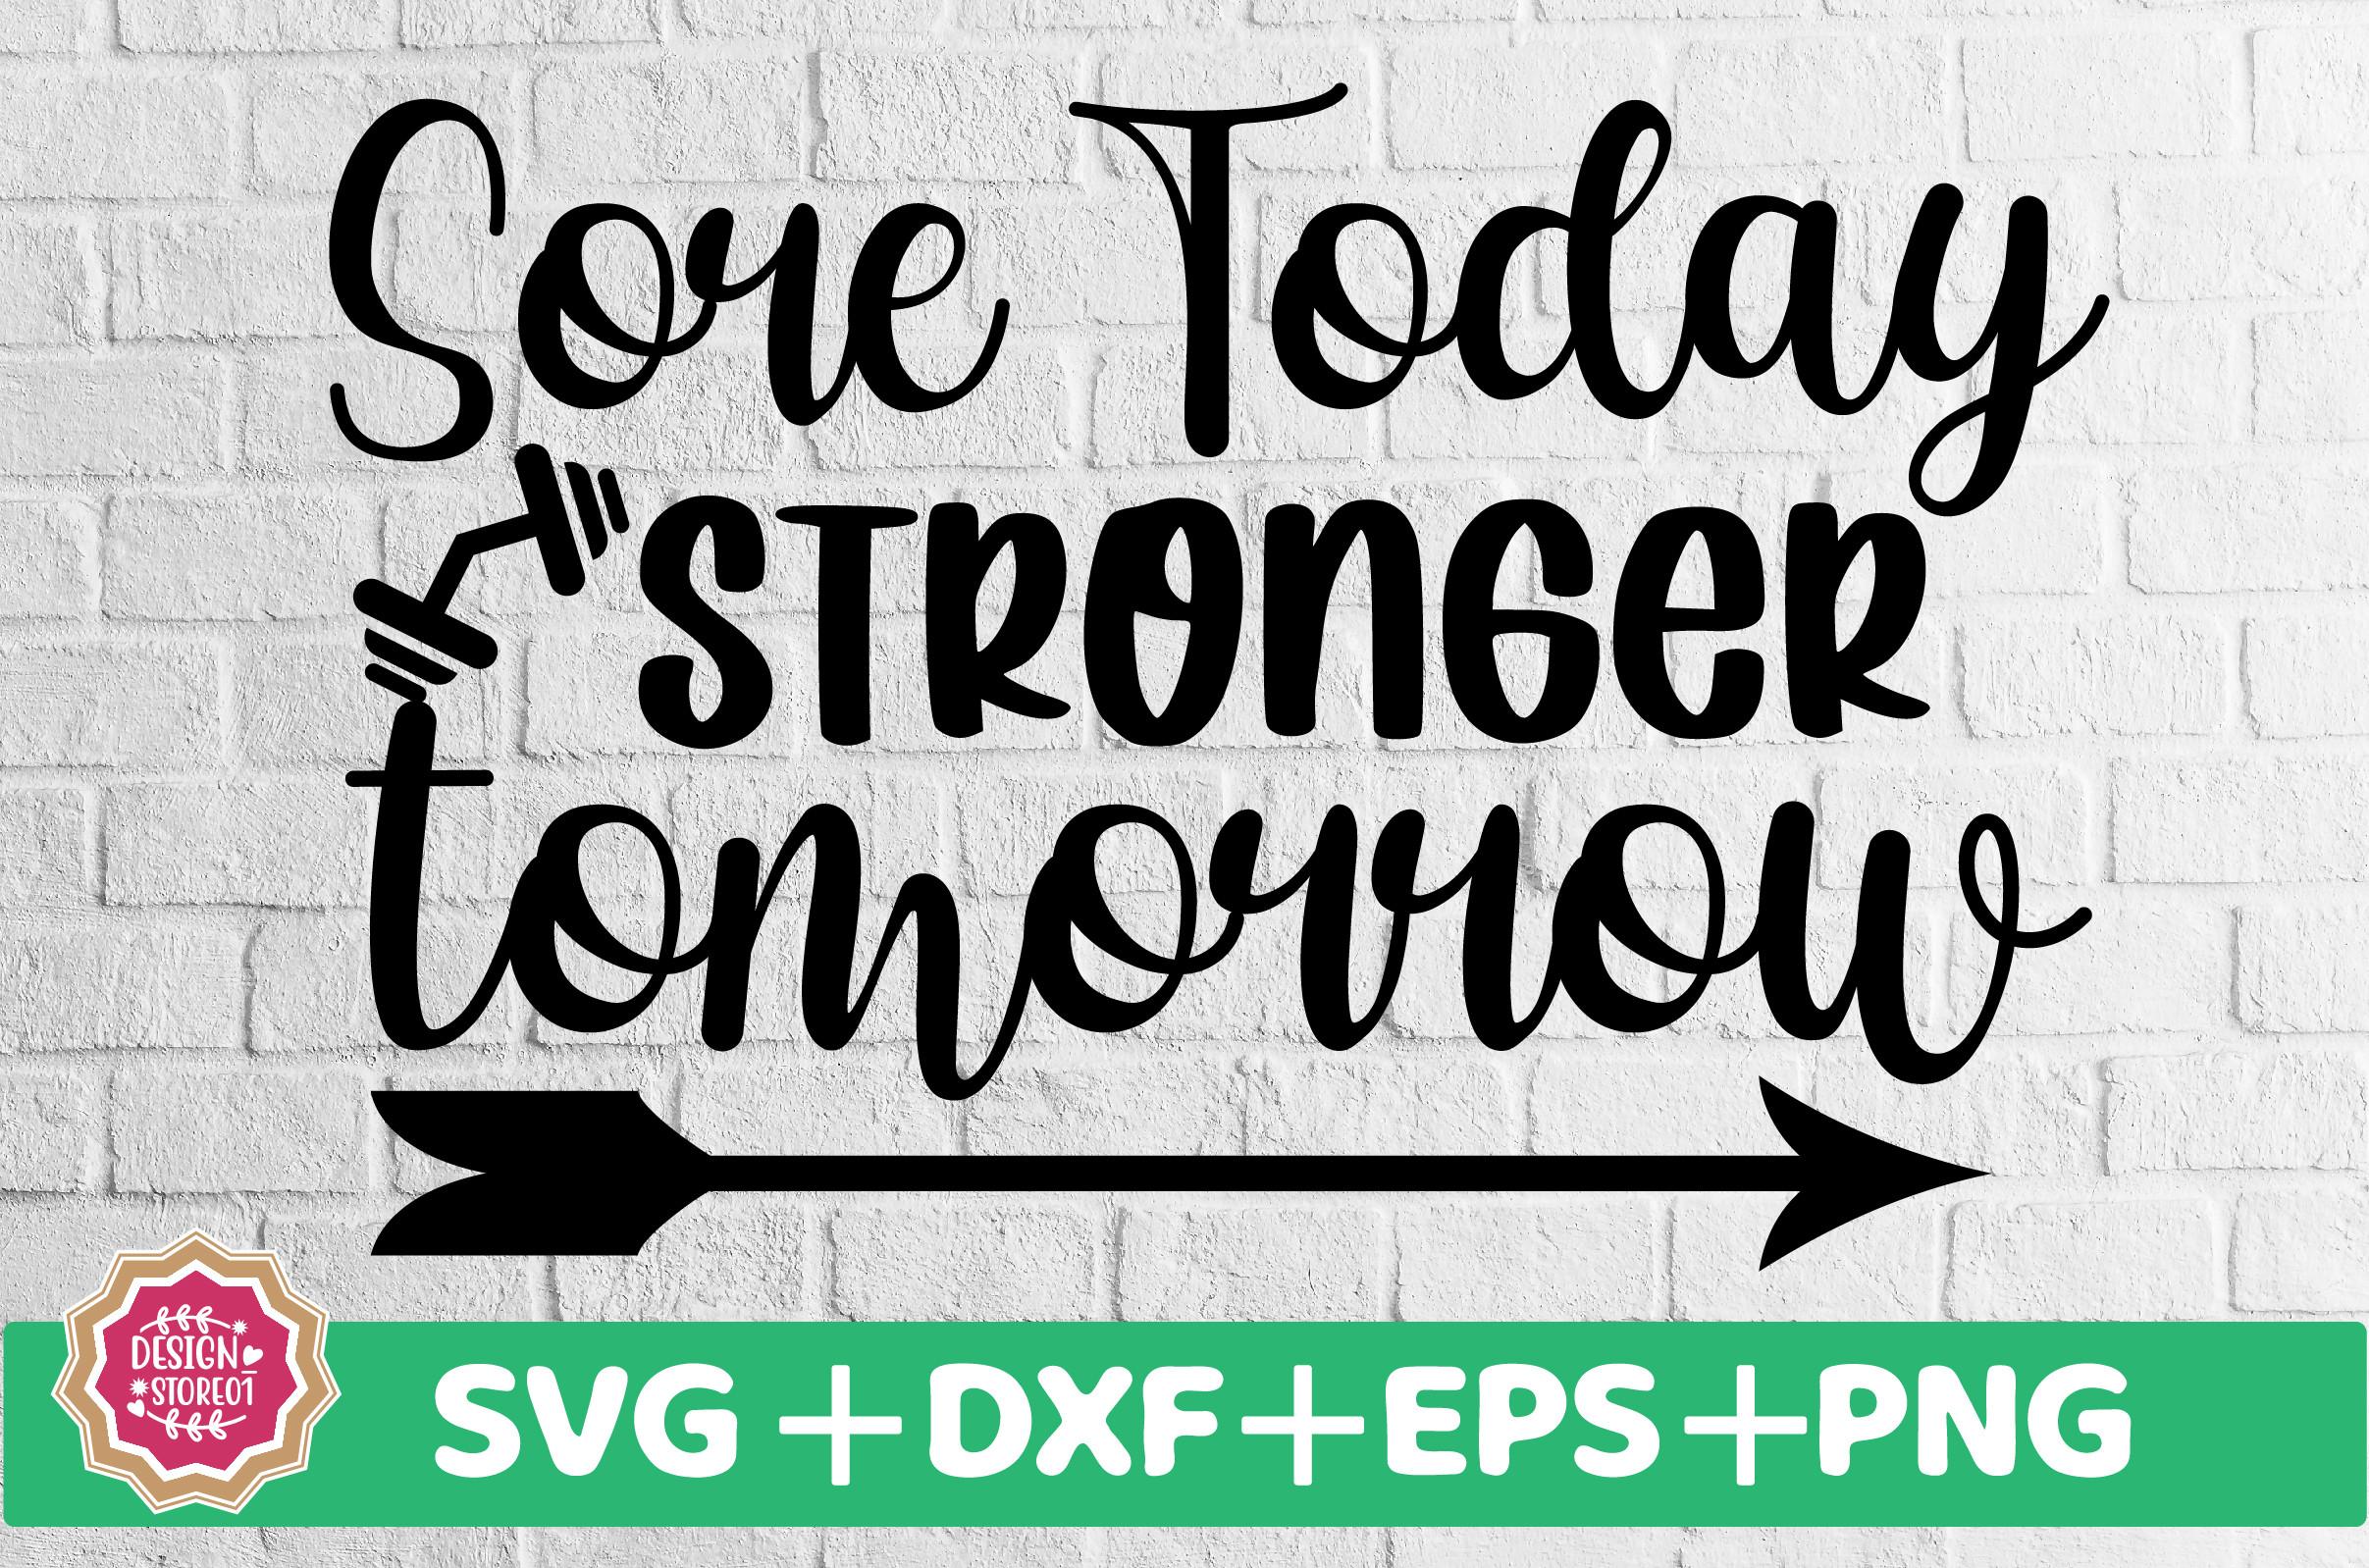 Sore Today Stronger Tomorrow SVG